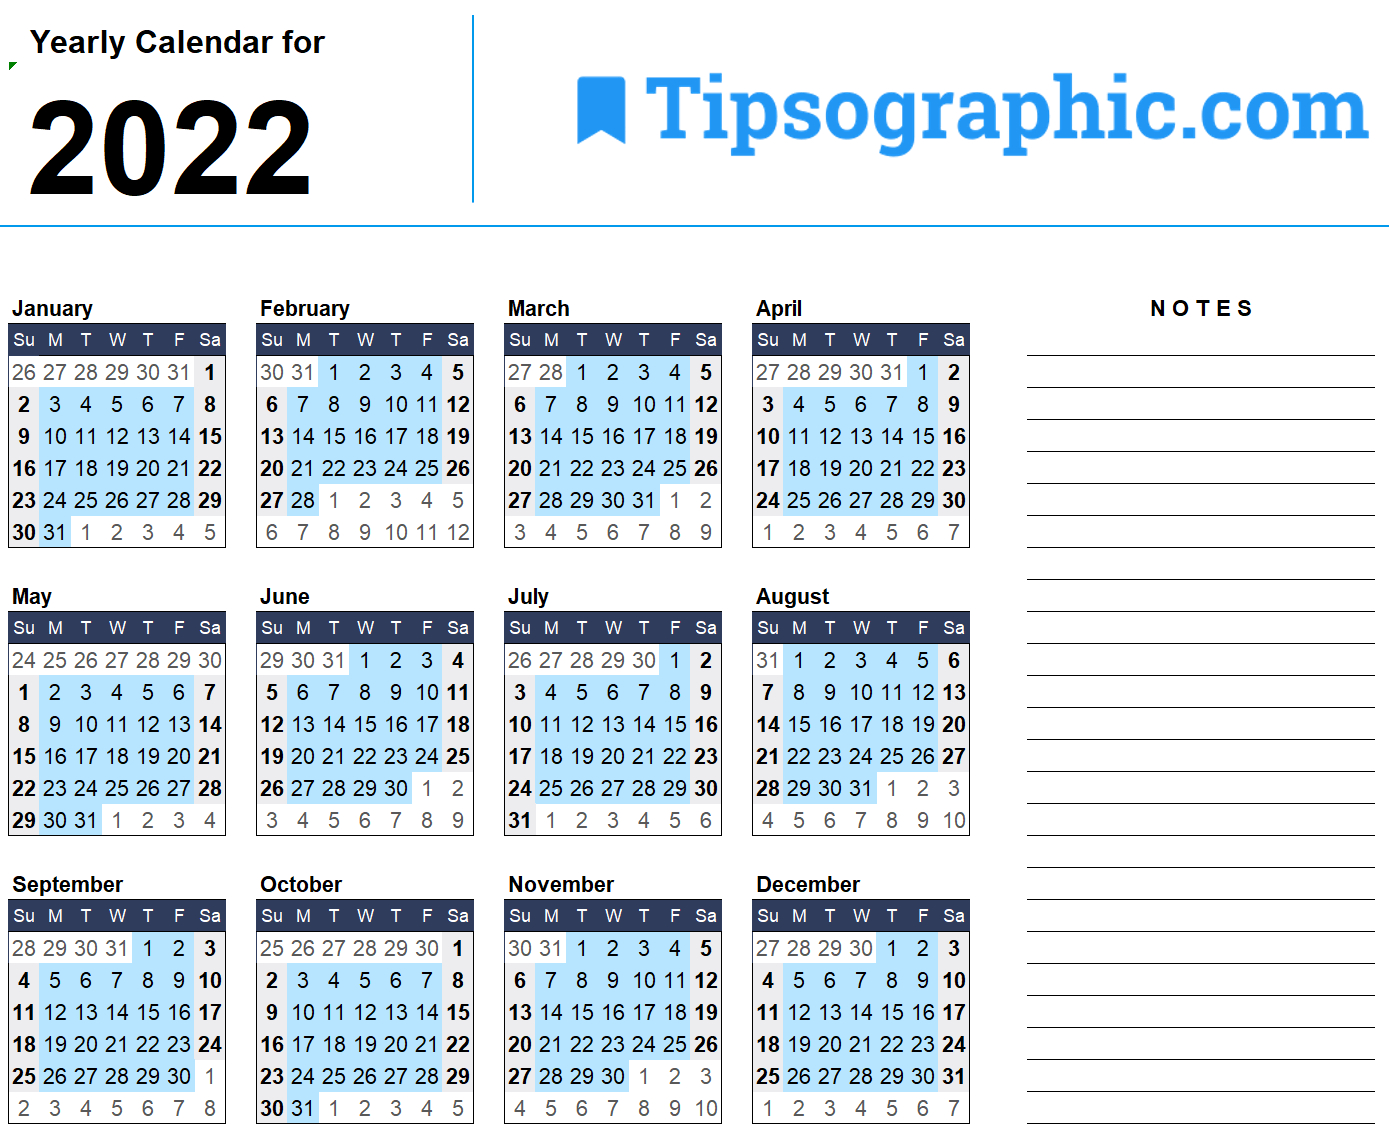 2022 Calendar Templates &amp; Images | Tipsographic-Printable Monthly Calendar For 2022